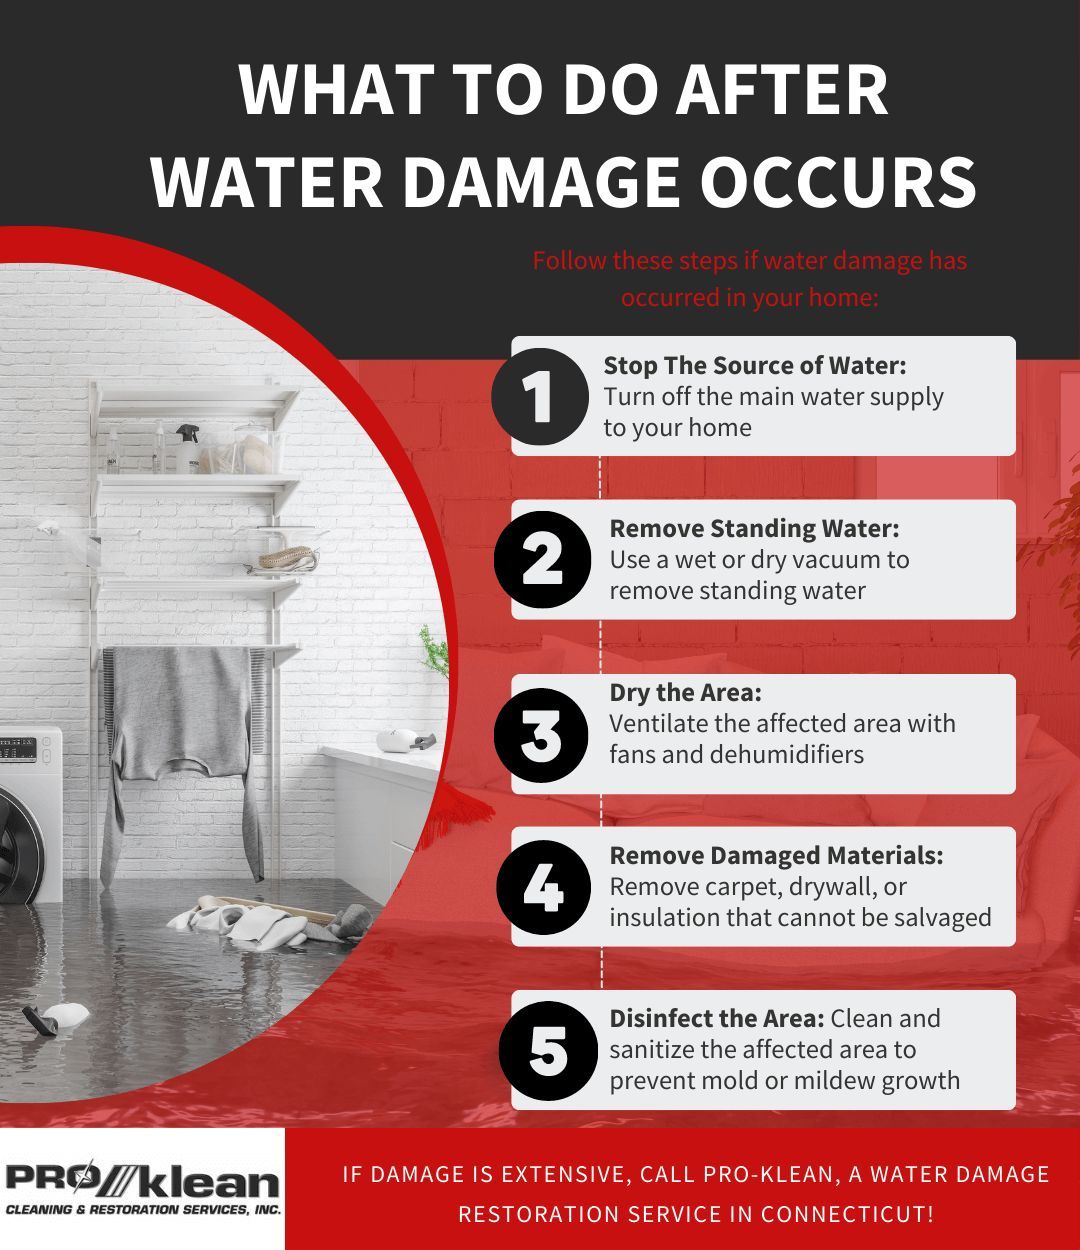 What to Do After Water Damage Occurs.jpg